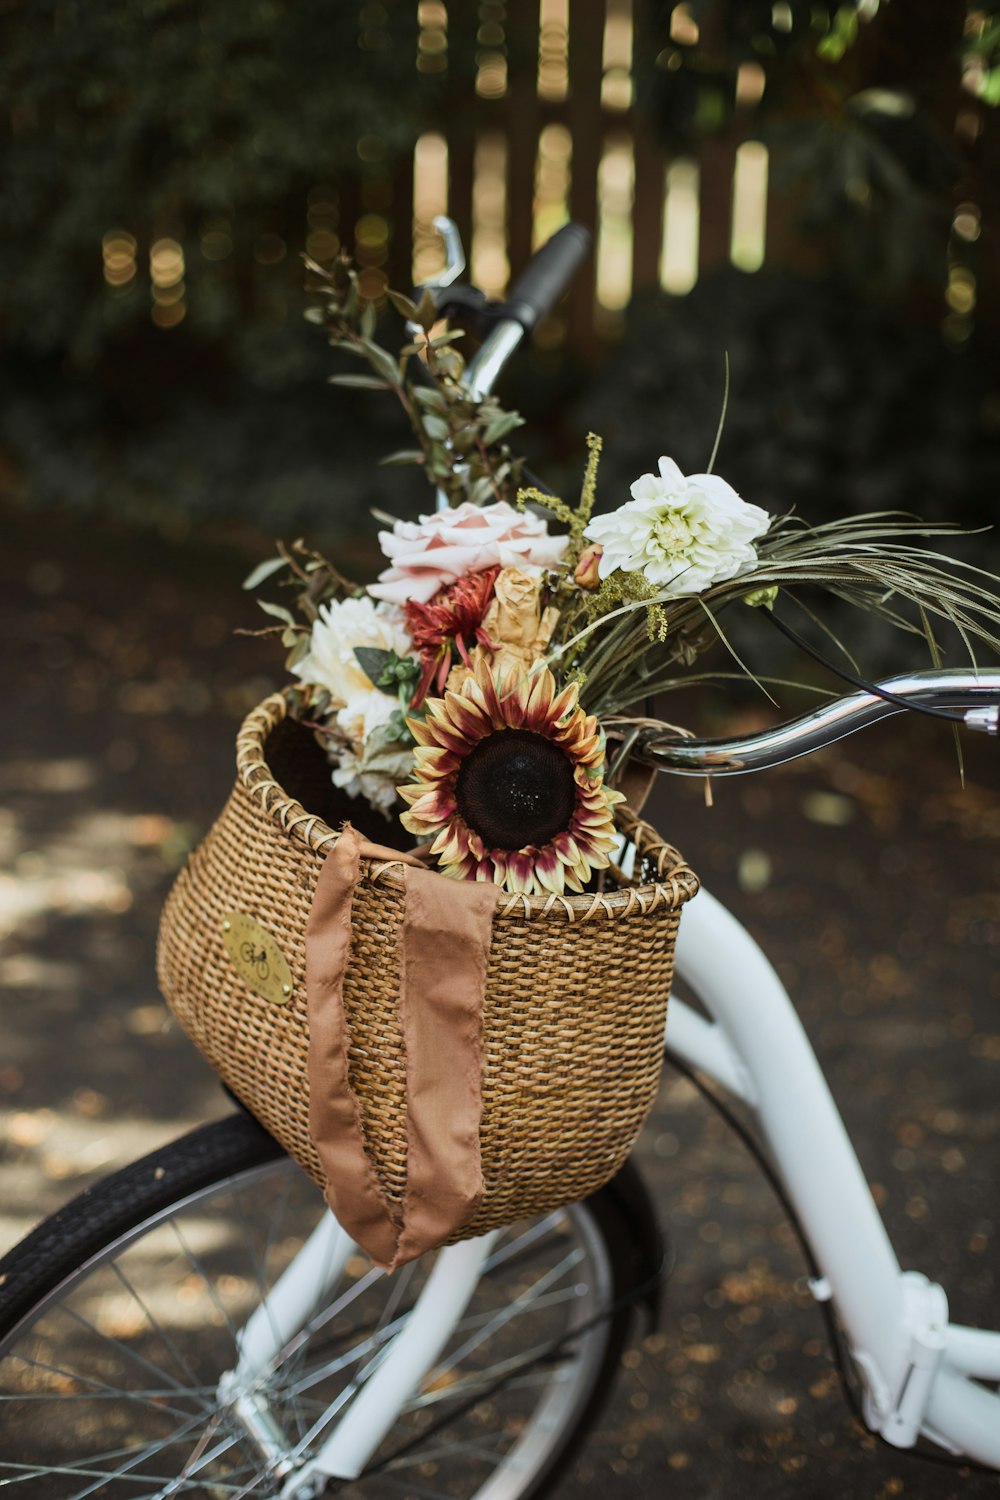 assorted flowers on a brown bike basket